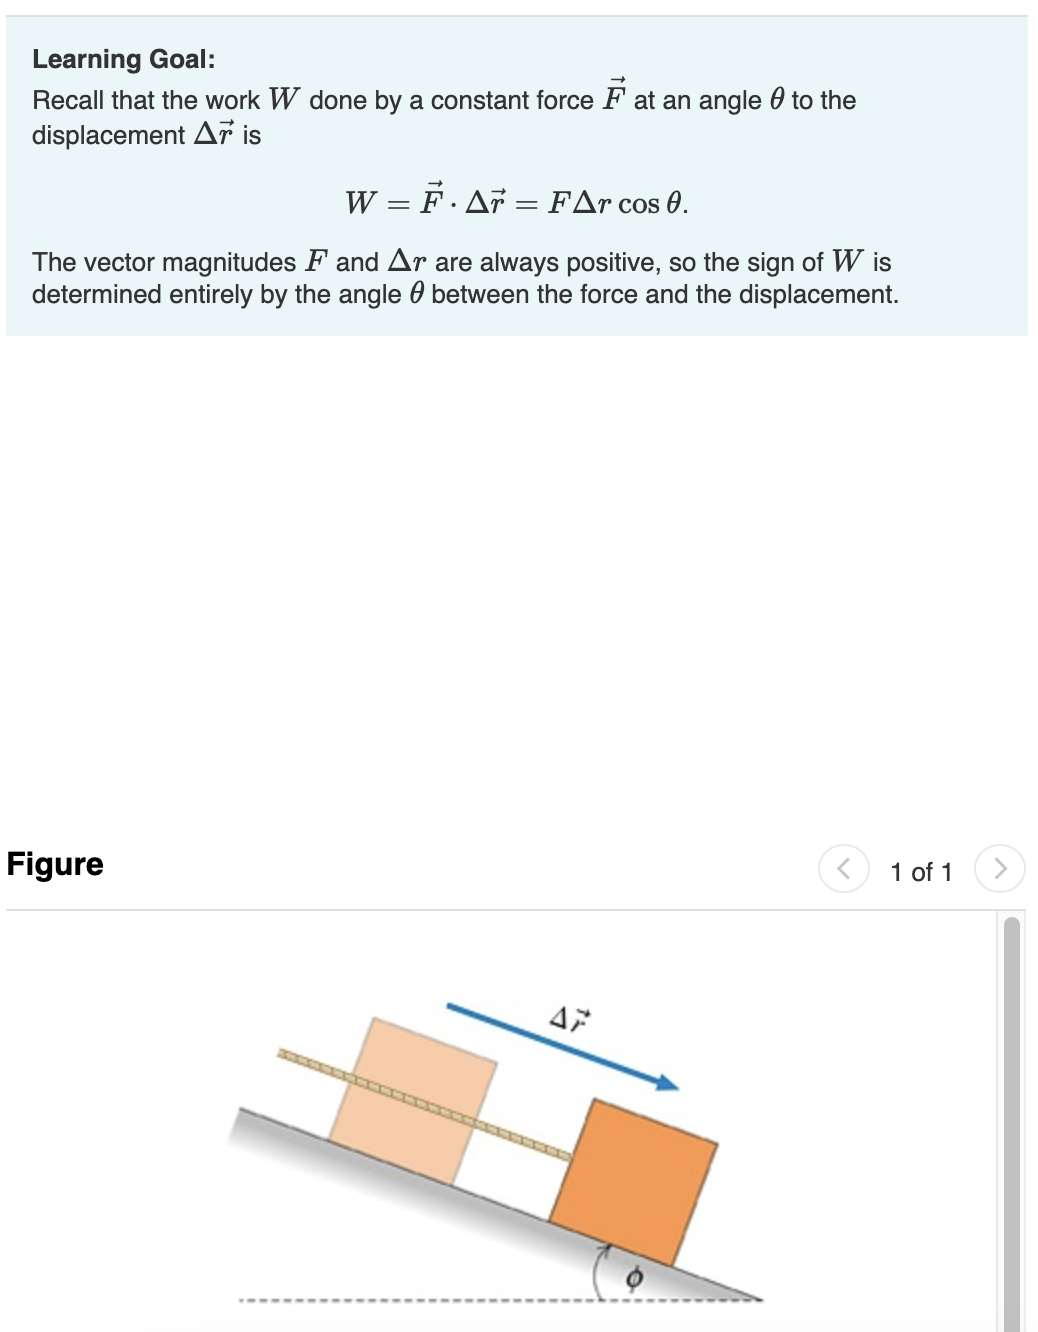 Learning Goal:
Recall that the work W done by a constant force Fat an angle to the
displacement Ar is
W = F· A7 = FAr cos 0.
The vector magnitudes F and Ar are always positive, so the sign of Wis
determined entirely by the angle between the force and the displacement.
Figure
AP
1 of 1